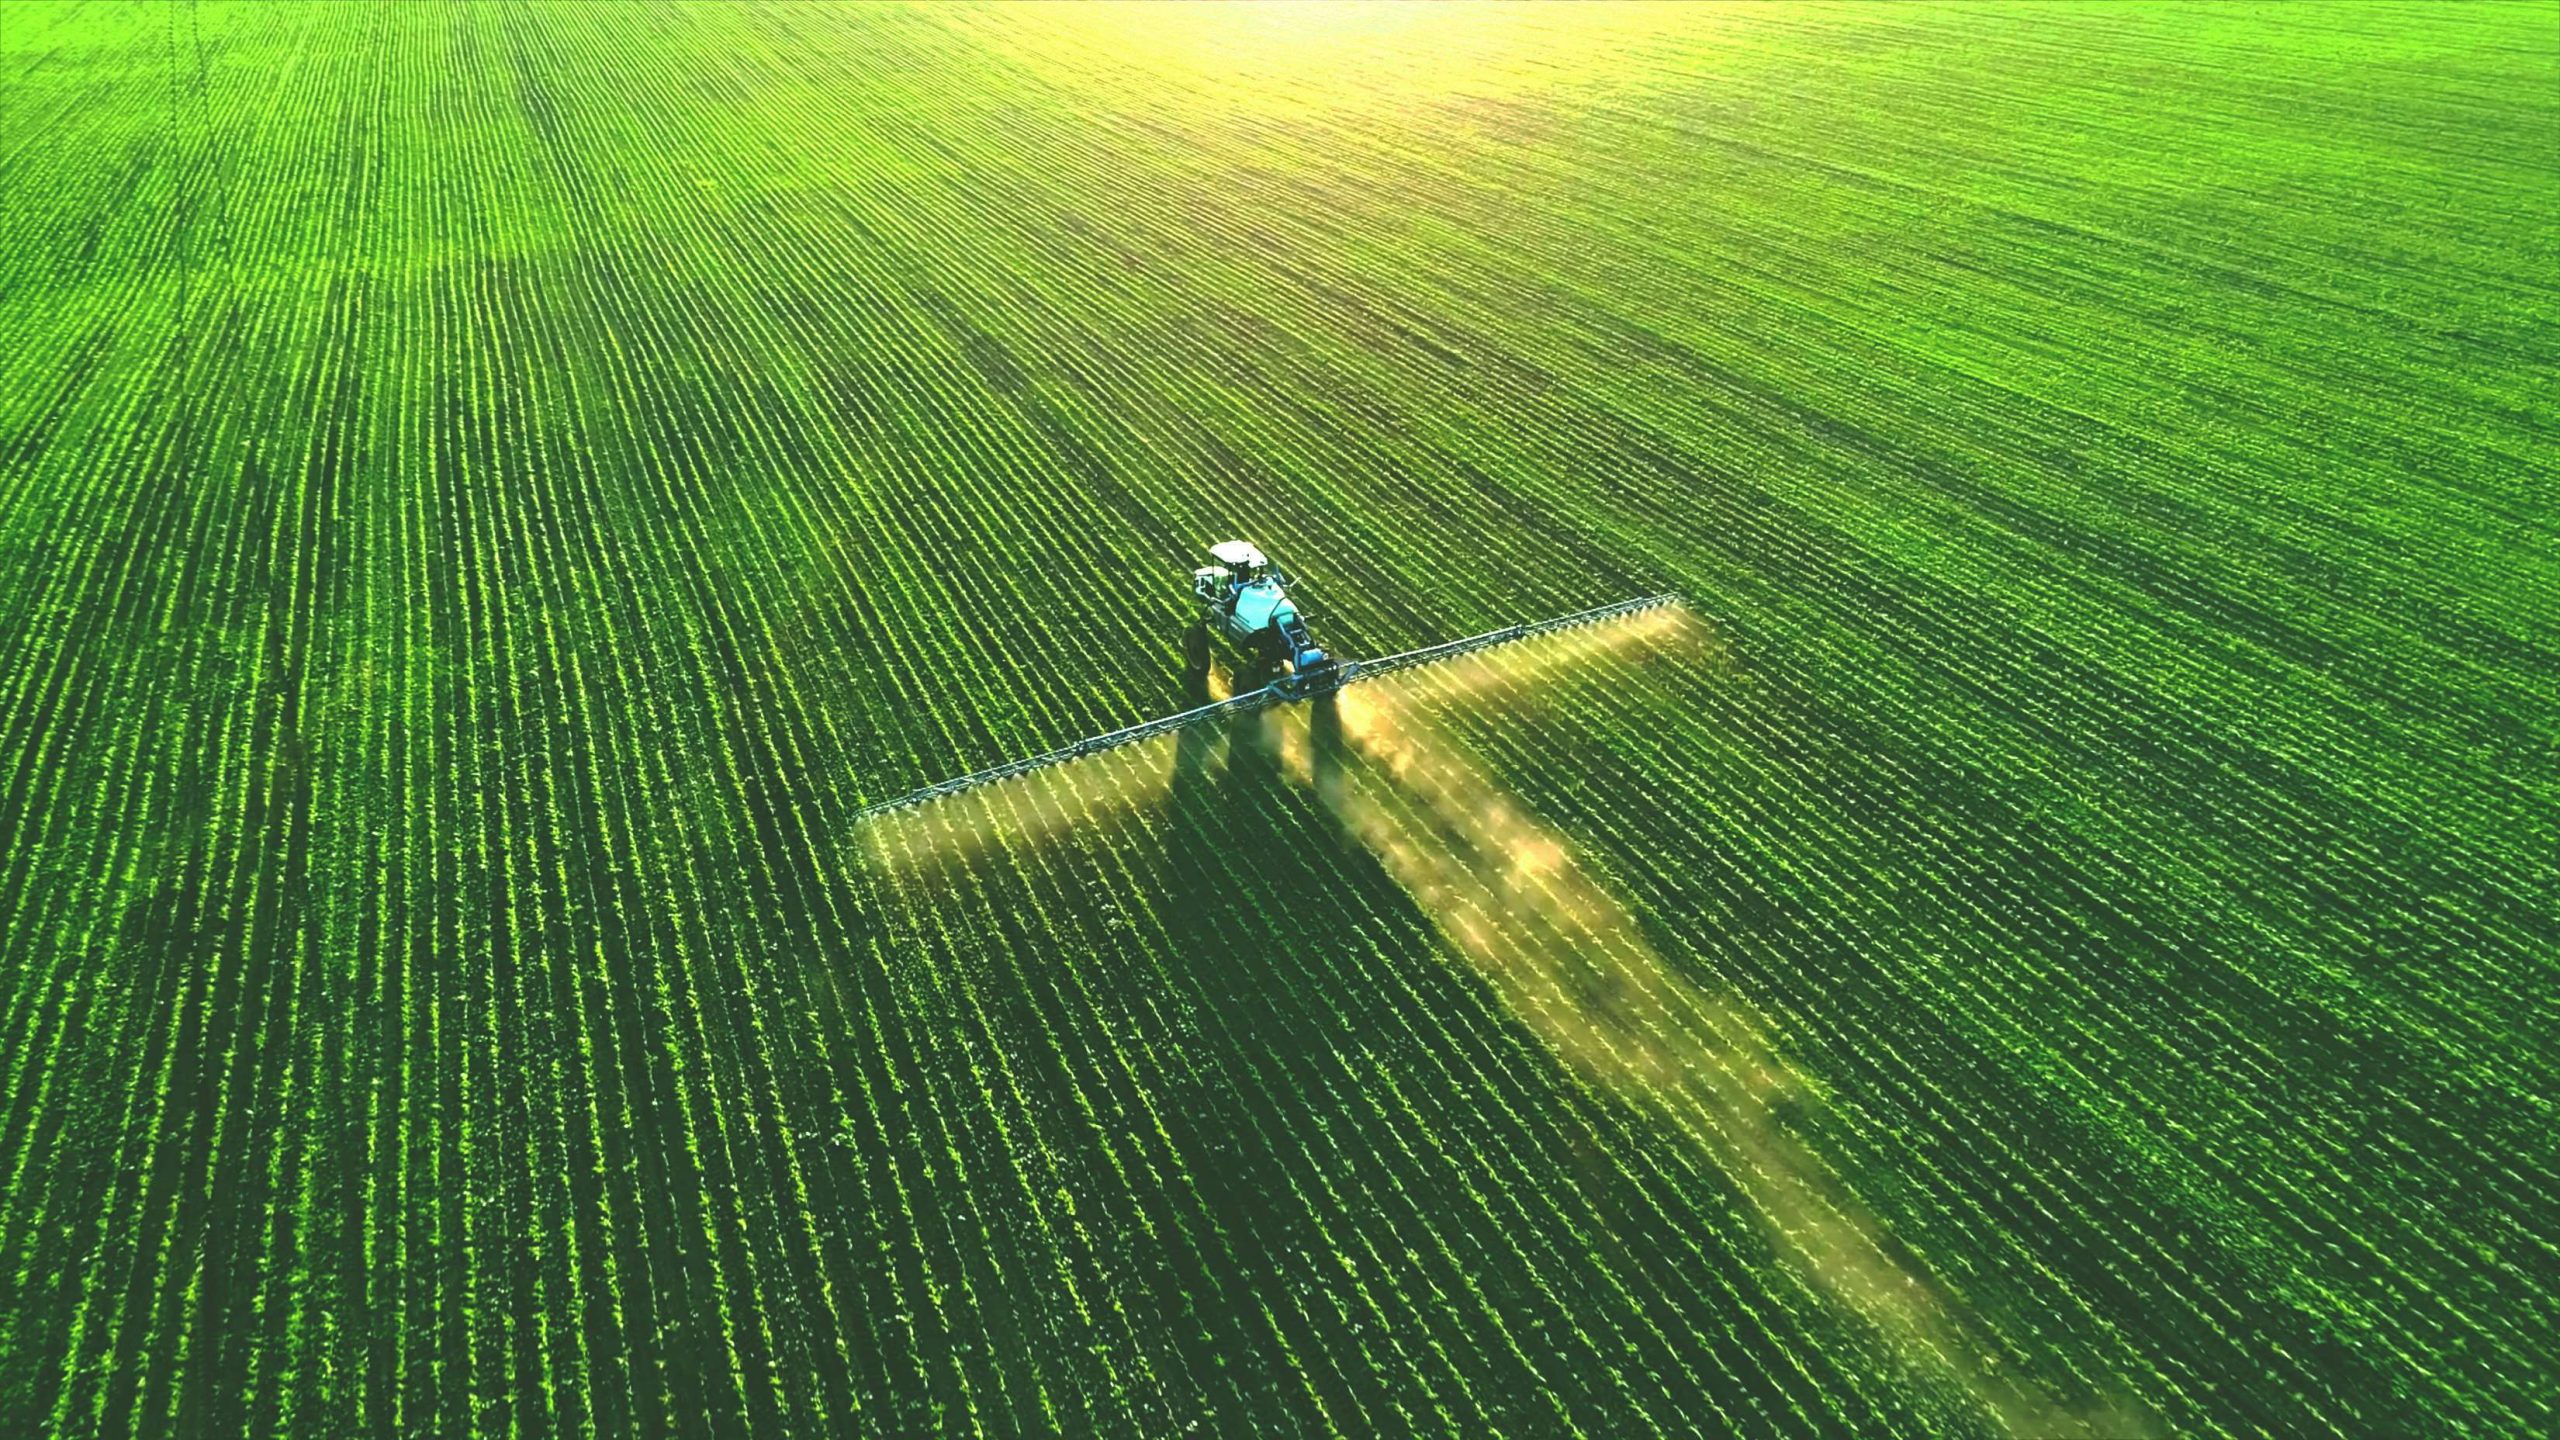 Spraying Agricultural Chemical over crop